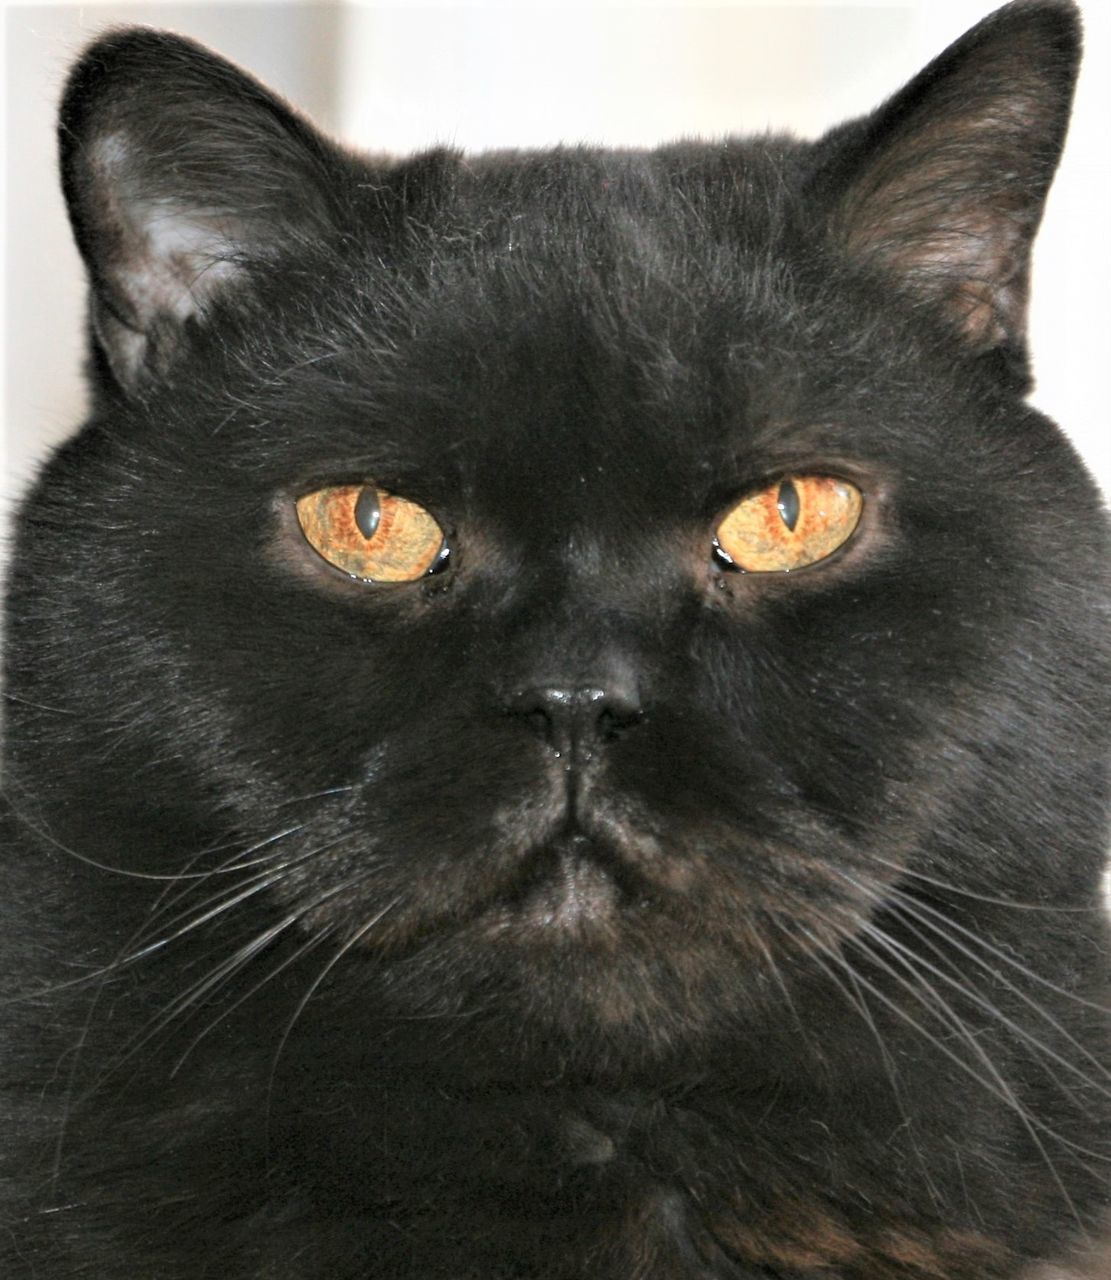 cat, pet, animal, animal themes, black cat, mammal, domestic cat, one animal, feline, domestic animals, black, whiskers, portrait, animal body part, looking at camera, close-up, small to medium-sized cats, felidae, domestic long-haired cat, no people, animal hair, carnivore, animal head, indoors